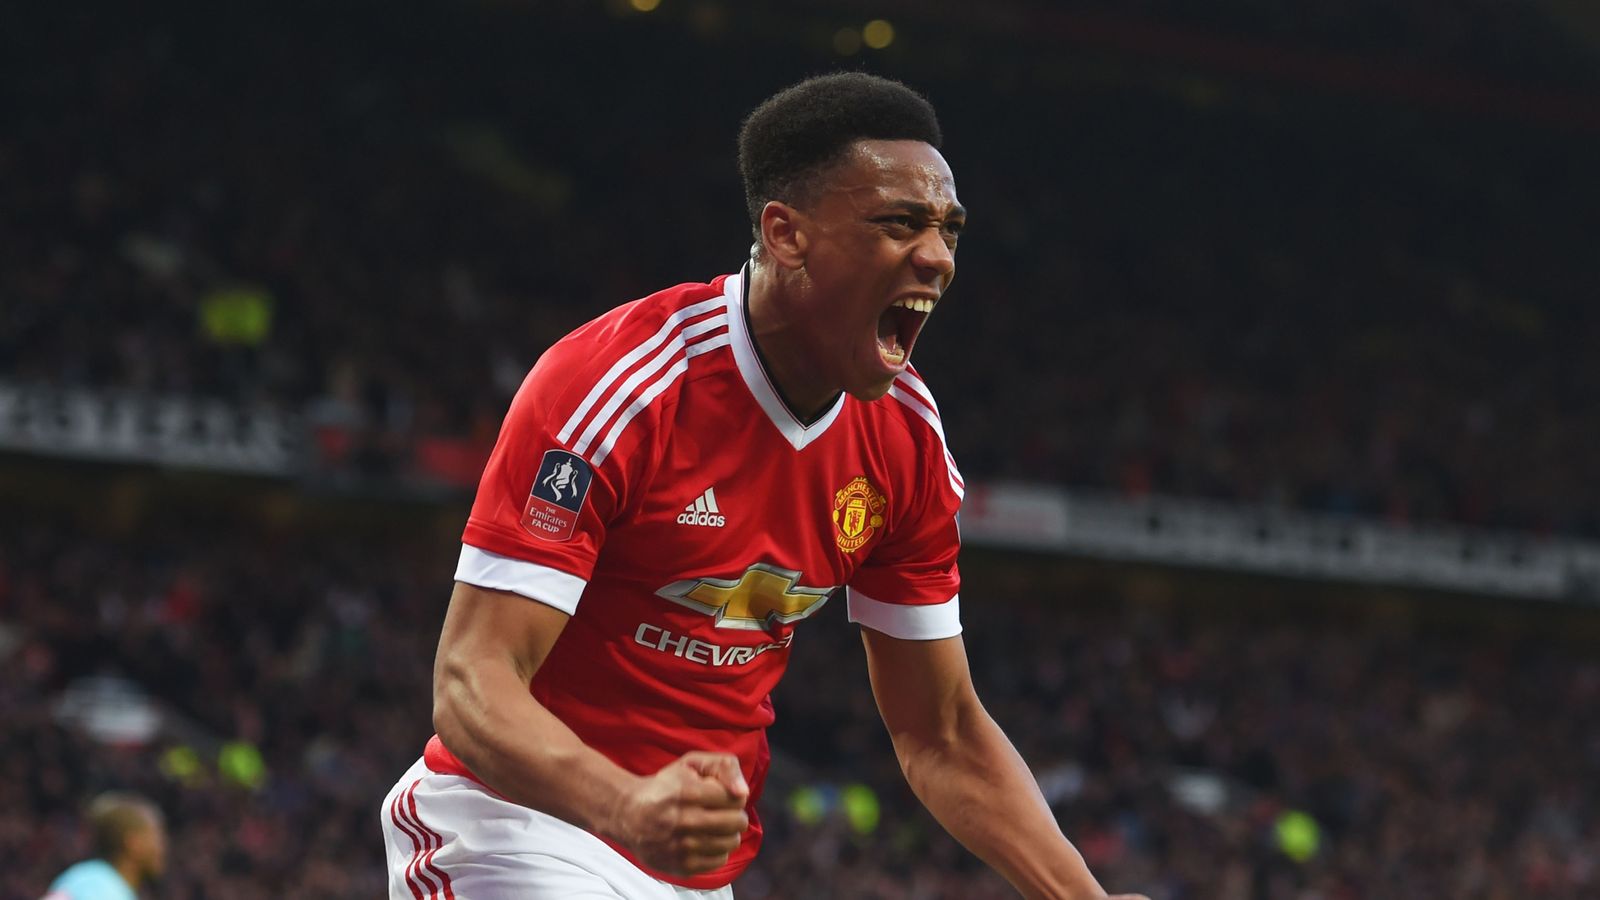 Anthony Martial as good as 20-year-old Thierry Henry - Louis Saha ...